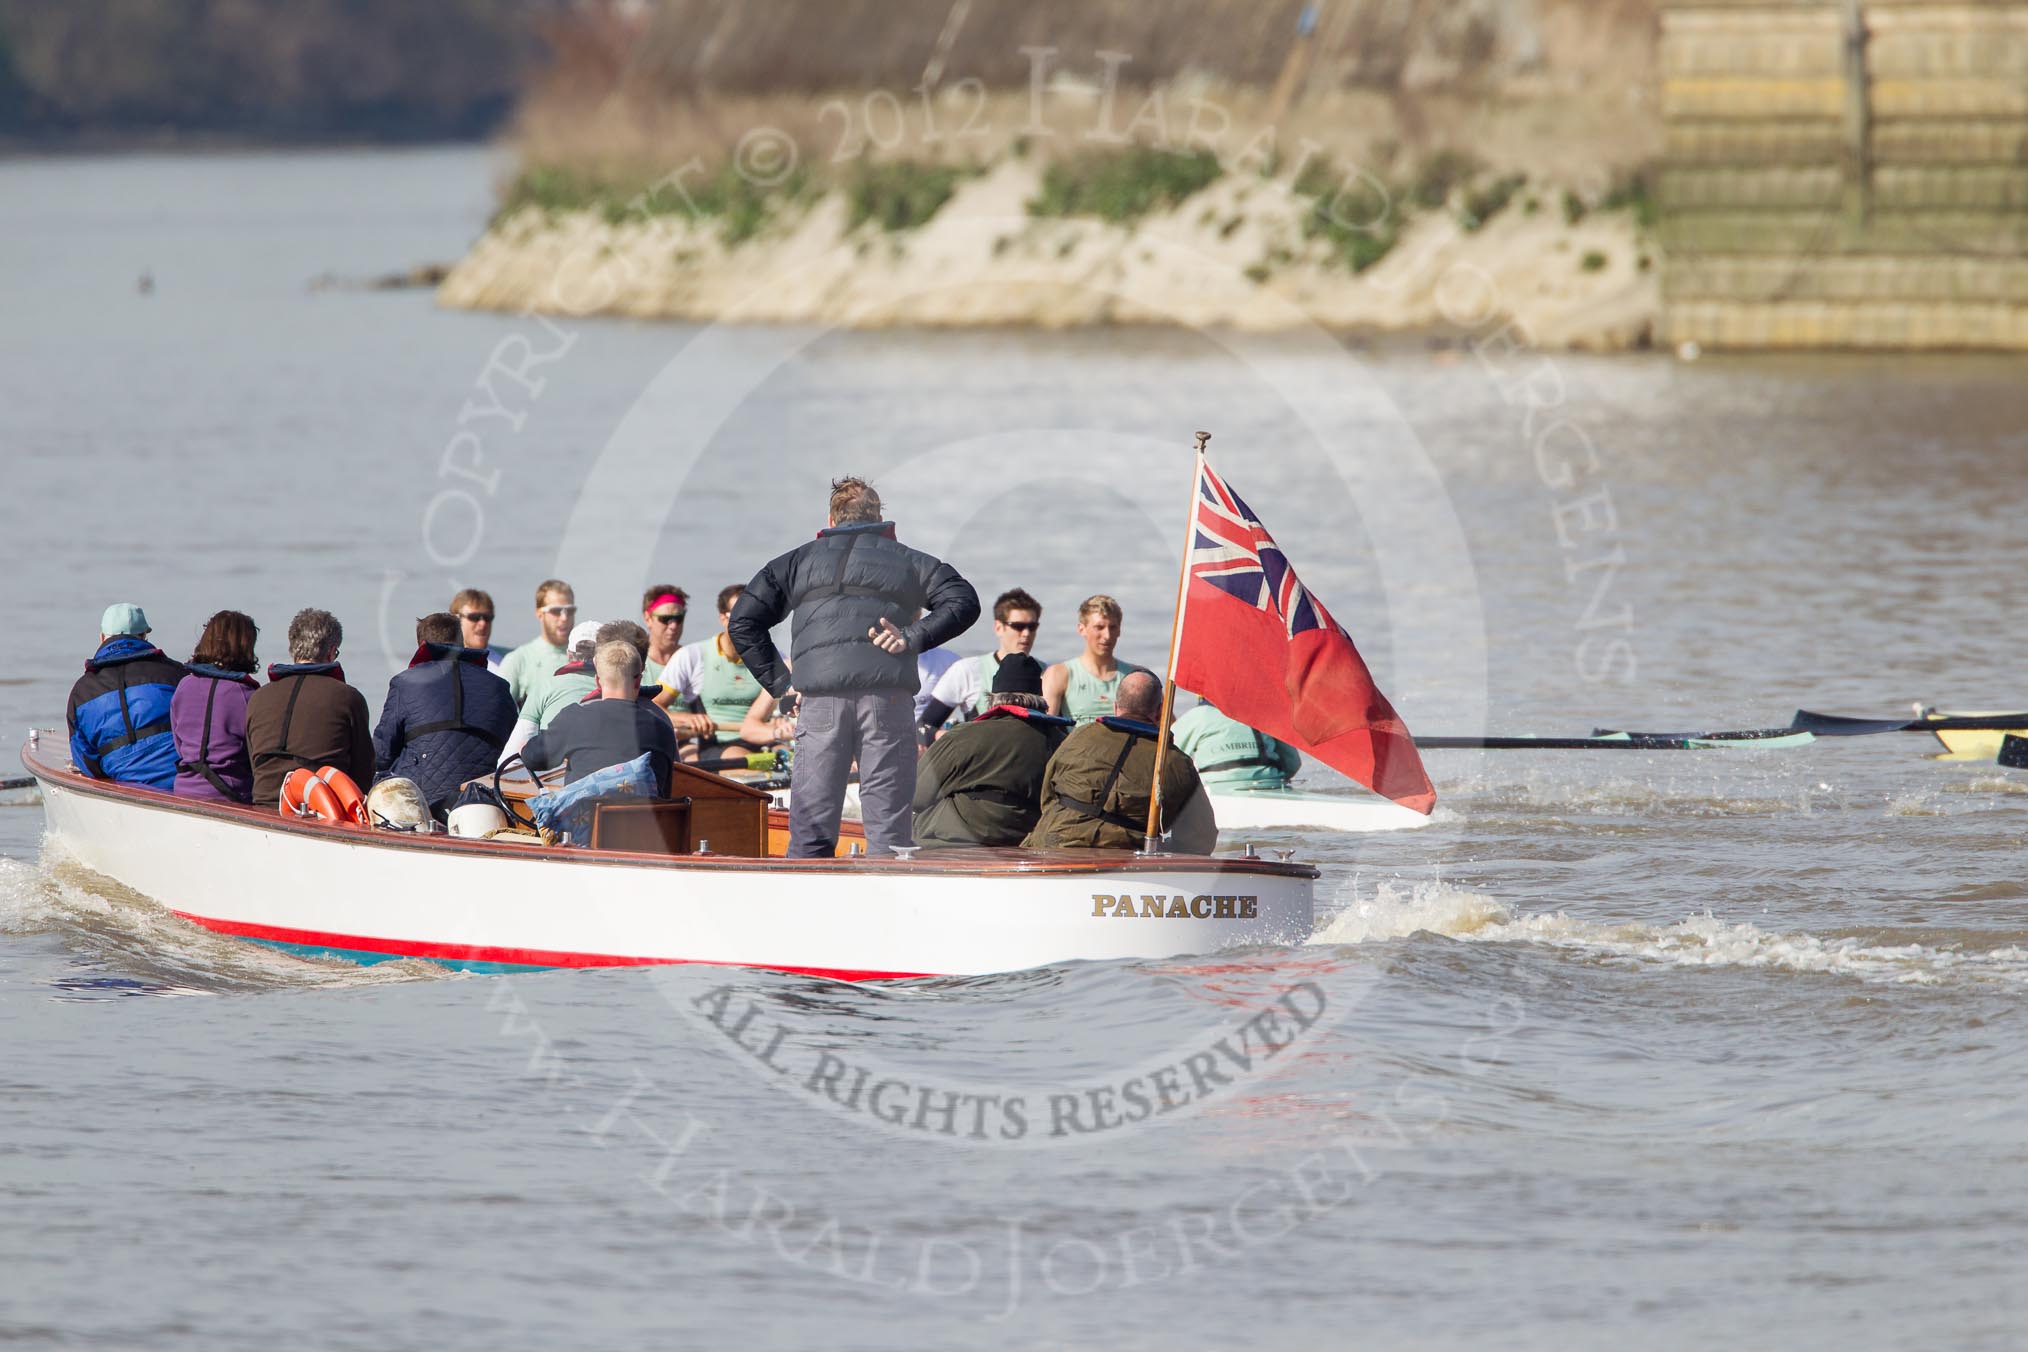 The Boat Race season 2012 - fixture CUBC vs Molesey BC: The CUBC Blue Boat nearly hidden behind a launch of officials. On the very right the bow of the Molesey BC boat they are racing..




on 25 March 2012 at 15:19, image #130